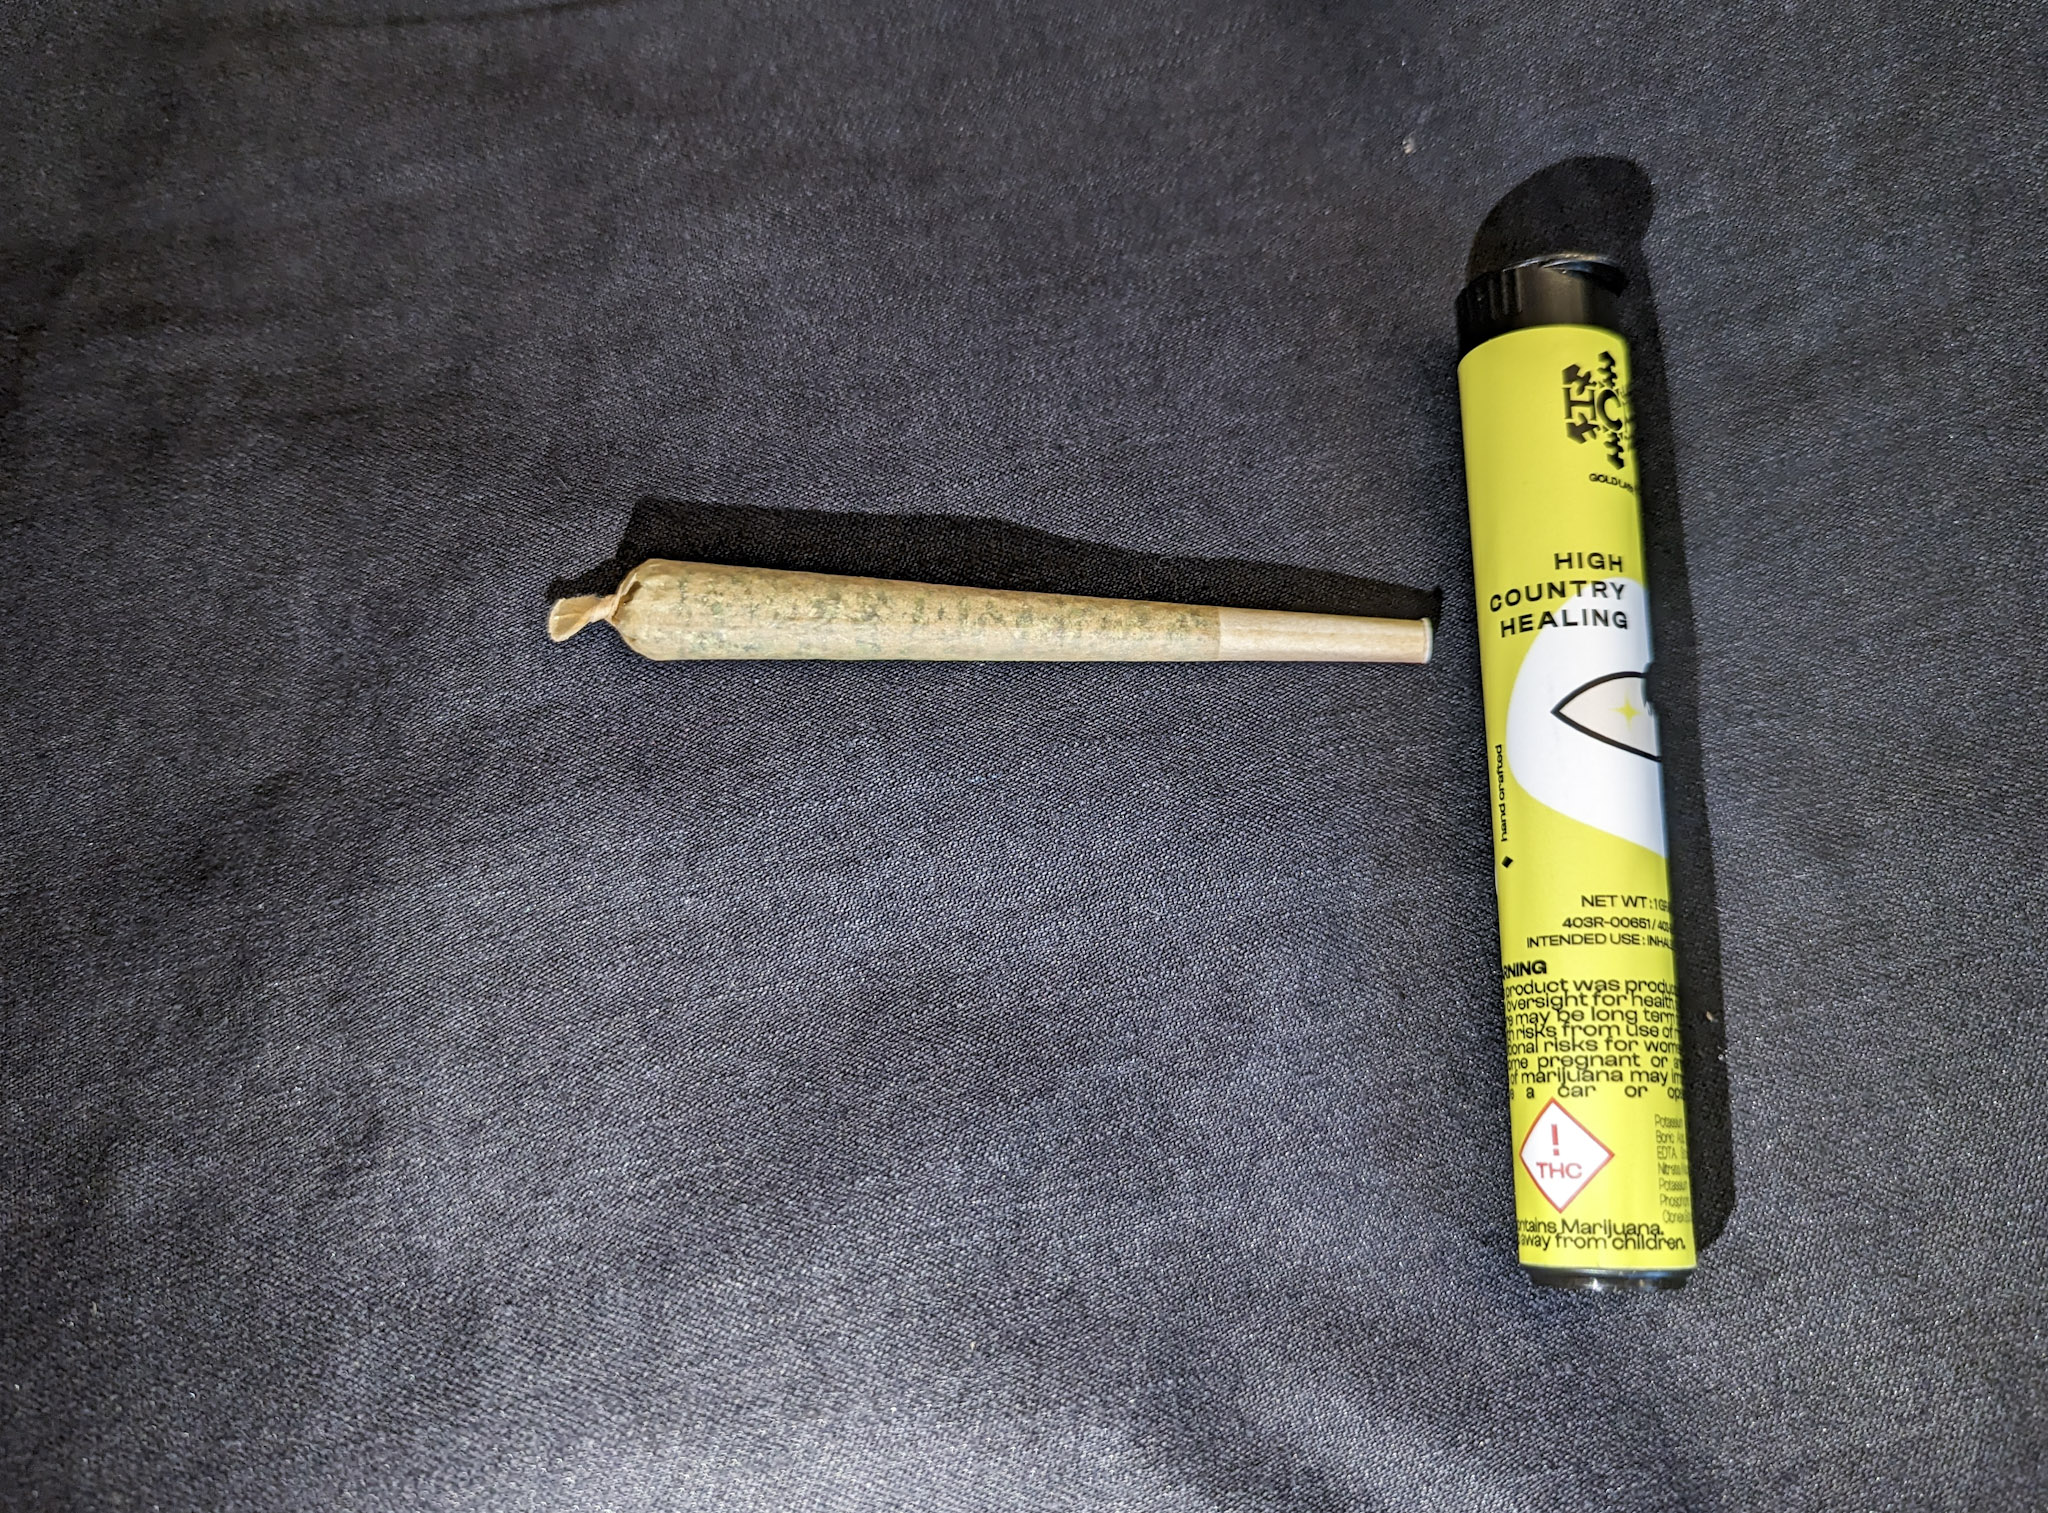 A picture of a joint with a joint holder - Cheetah Piss Strain from High Mountain Healing in Colorado.